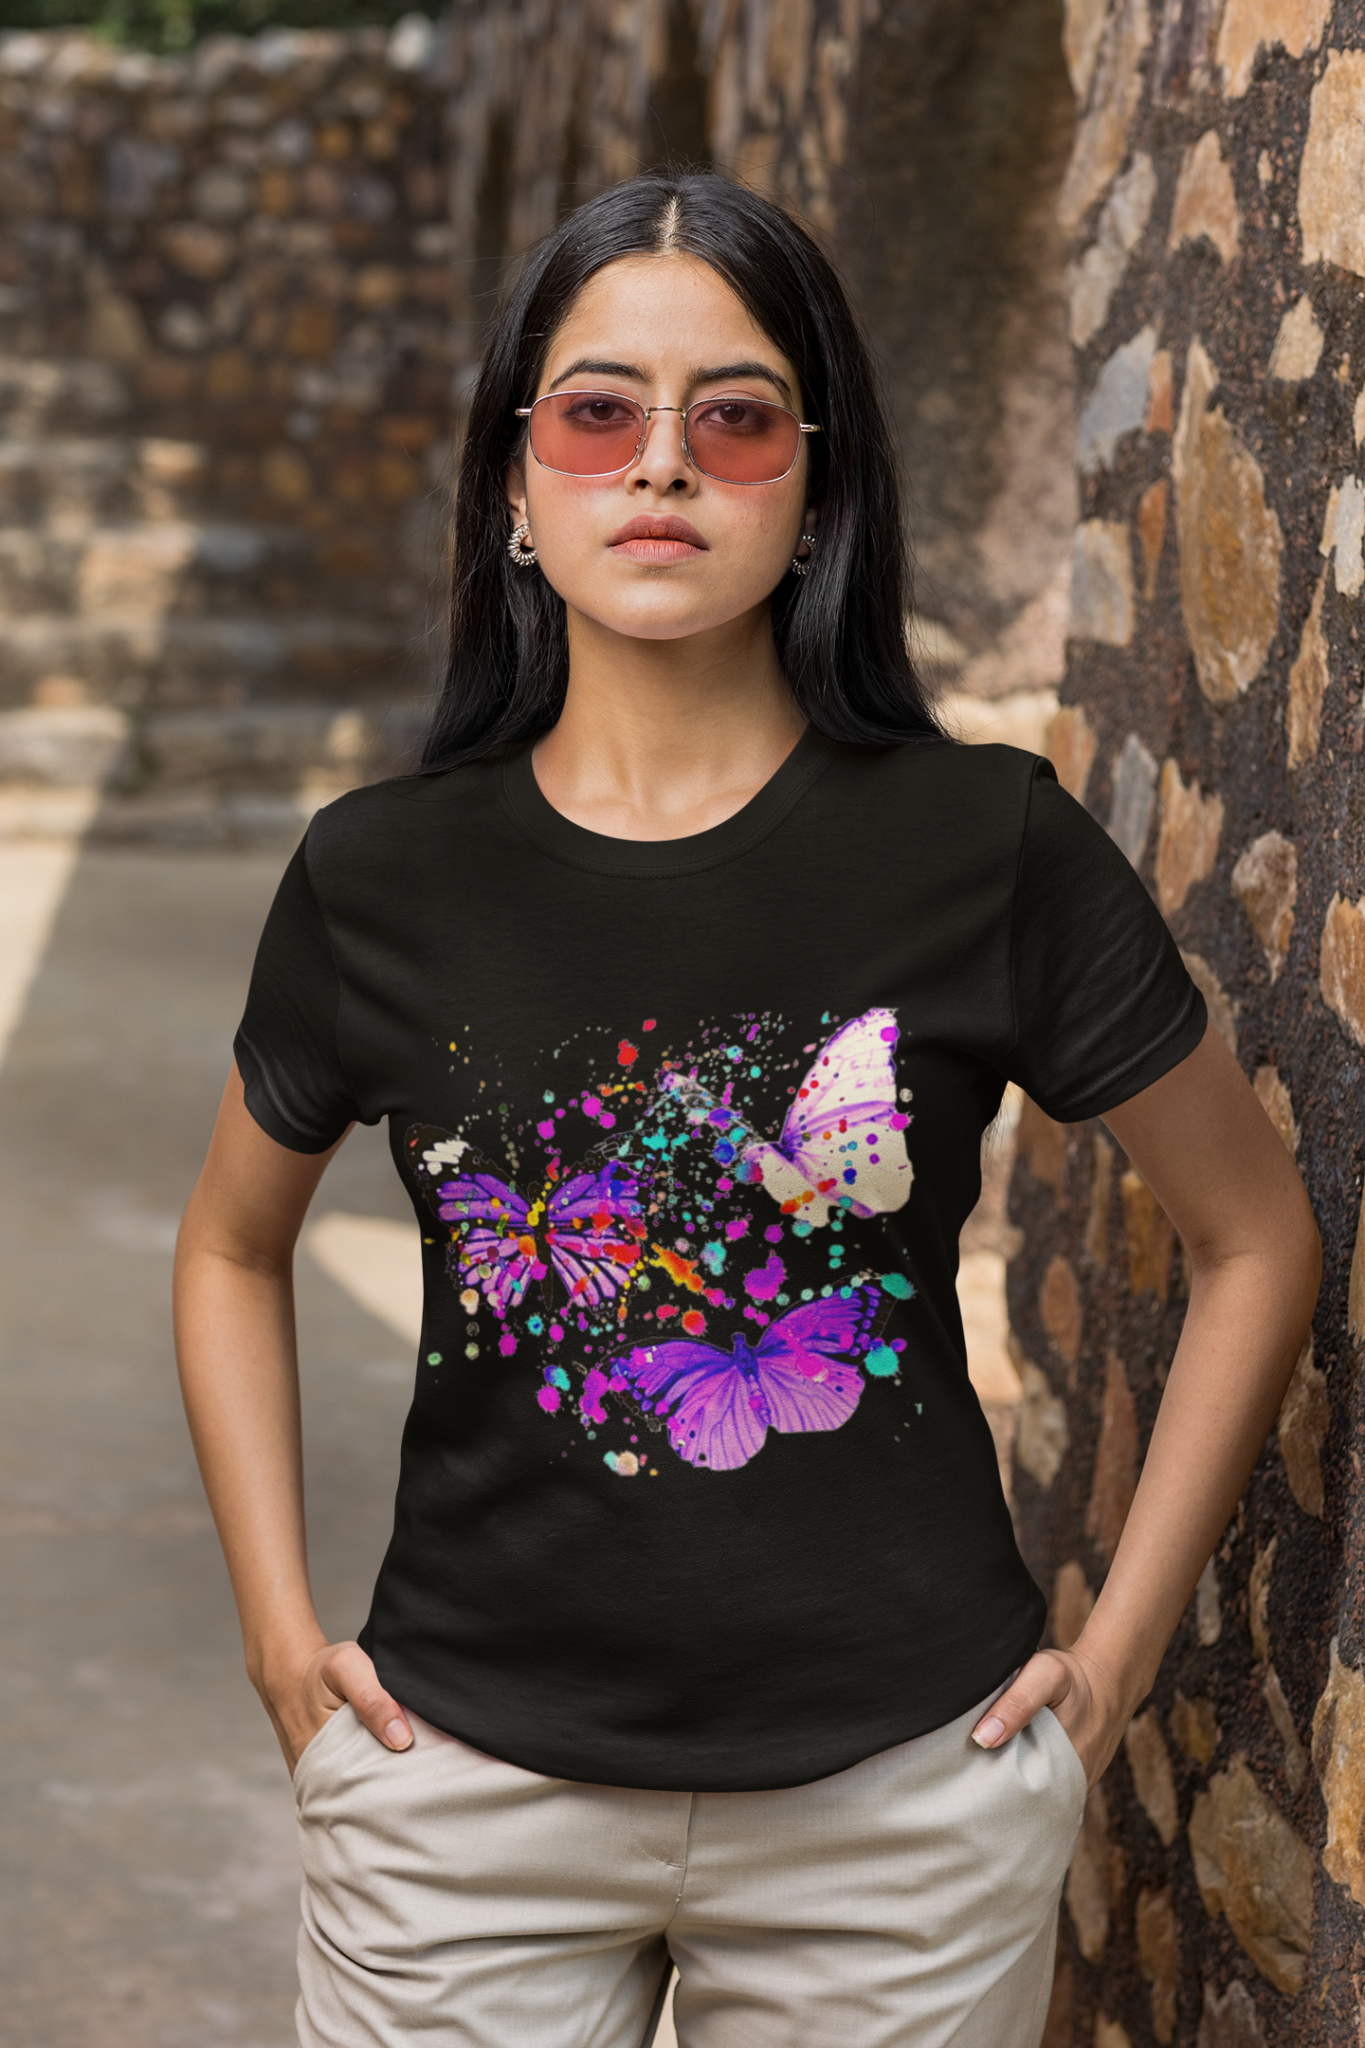 basic-t-shirt-mockup-featuring-a-serious-woman-with-sunglasses-with-her-hands-in-her-pockets-m26378